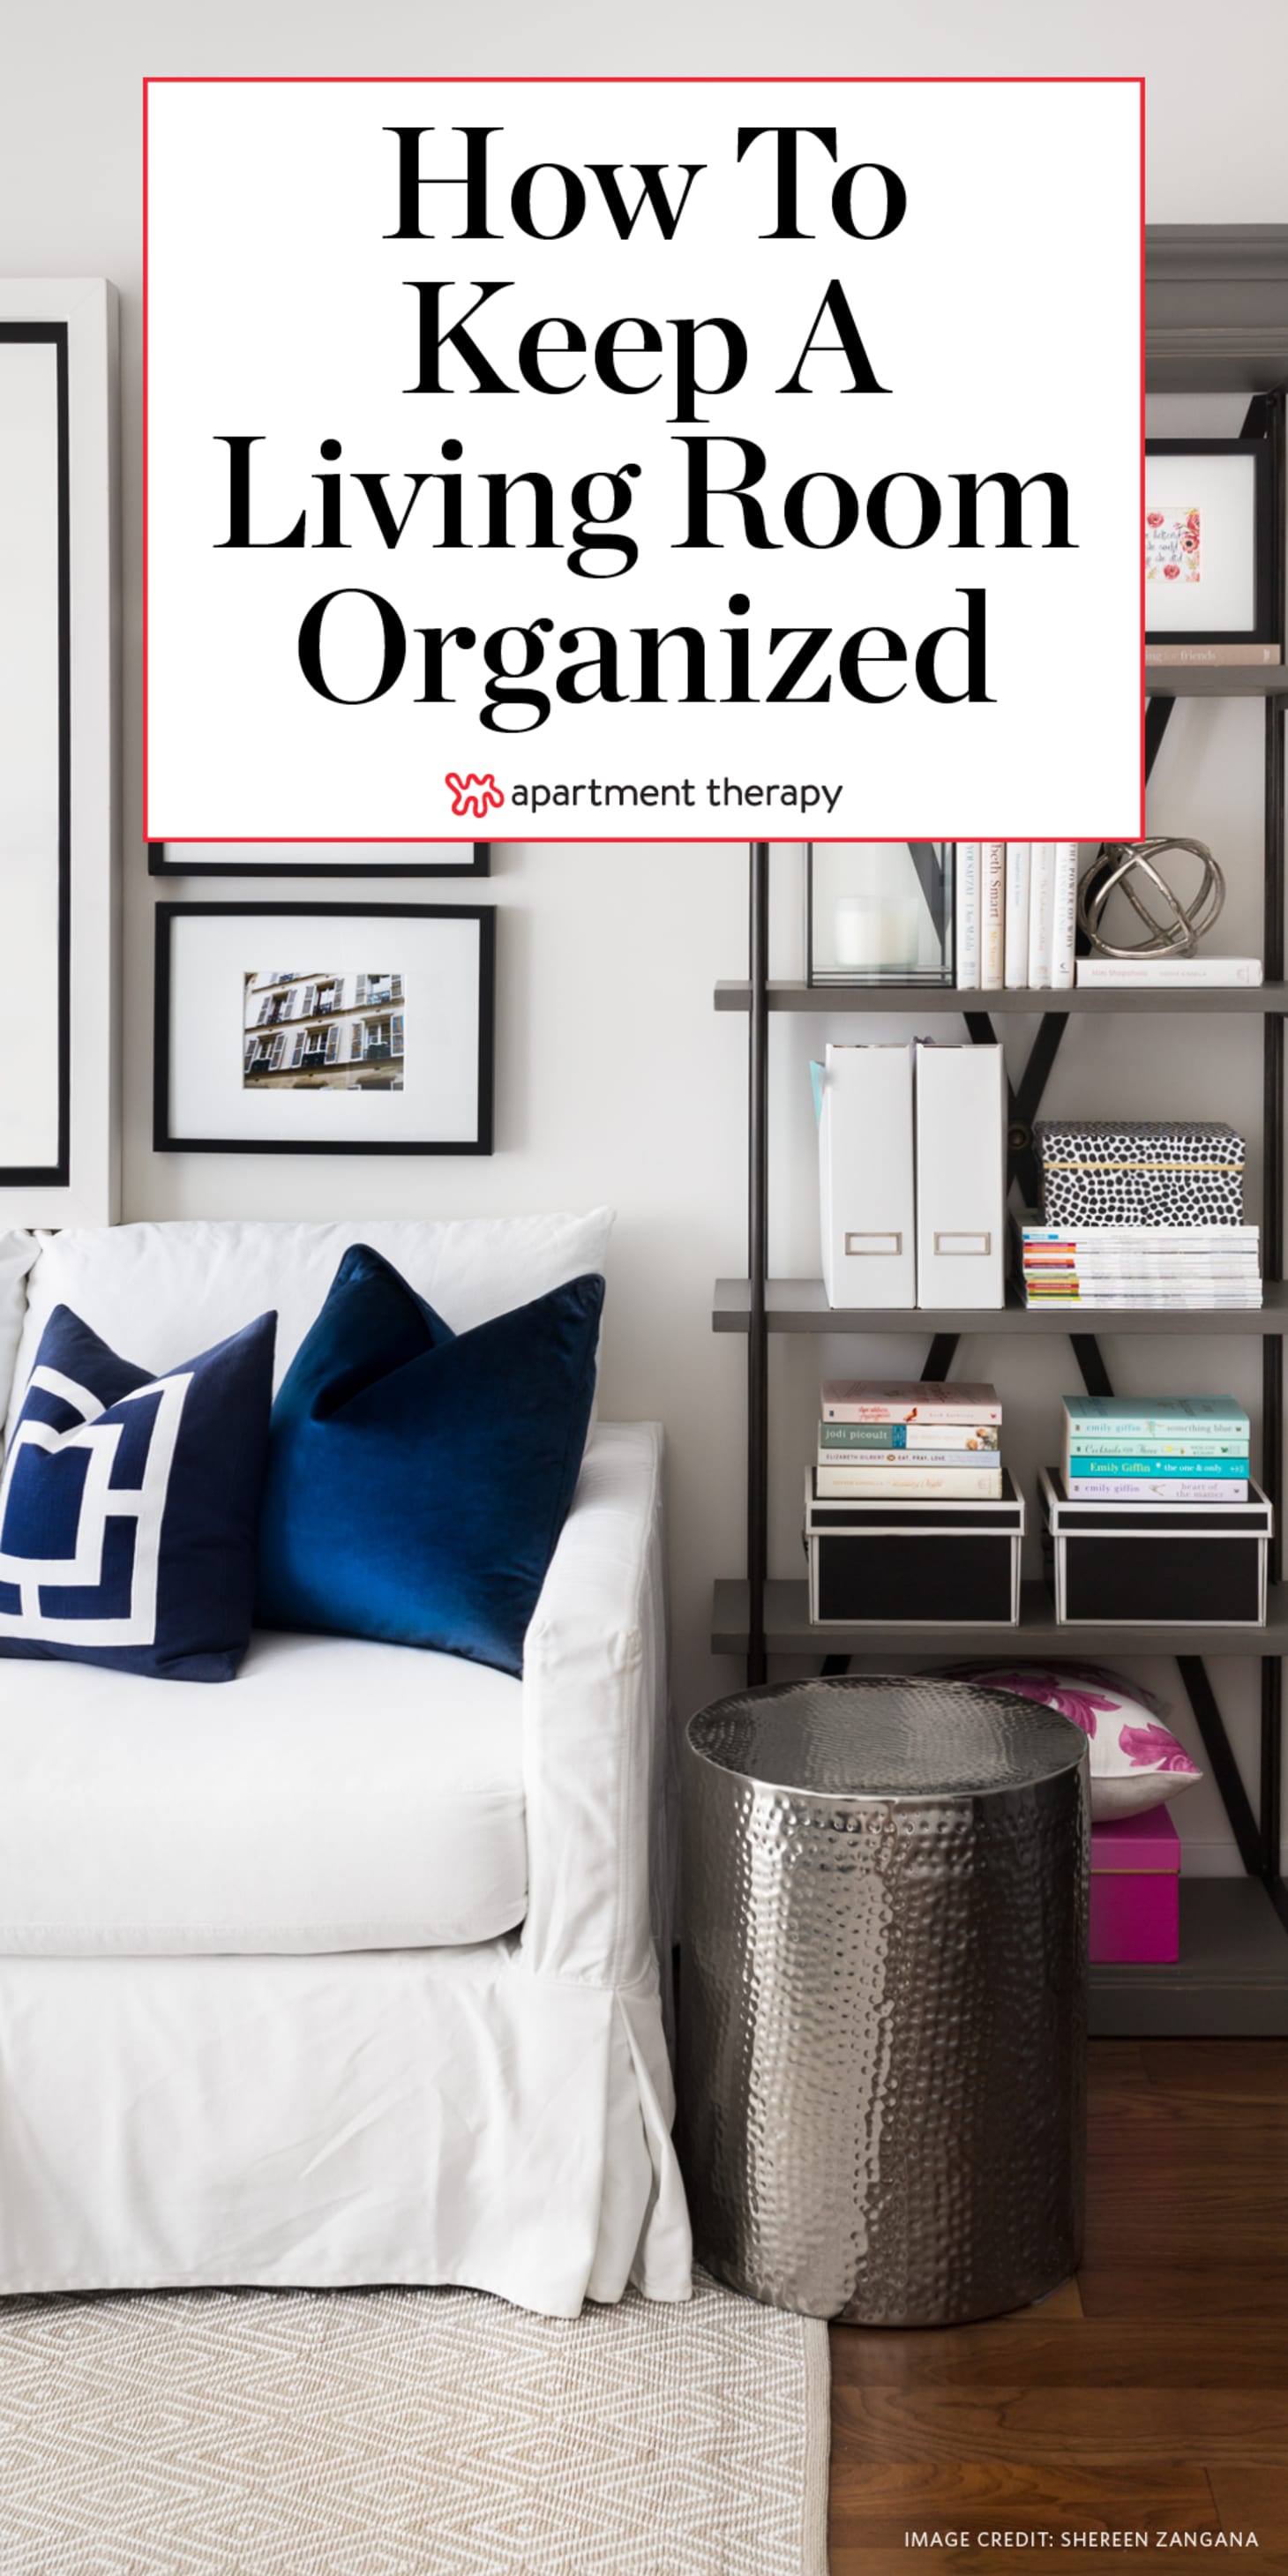 Organized Living Room Ideas and Tips | Apartment Therapy